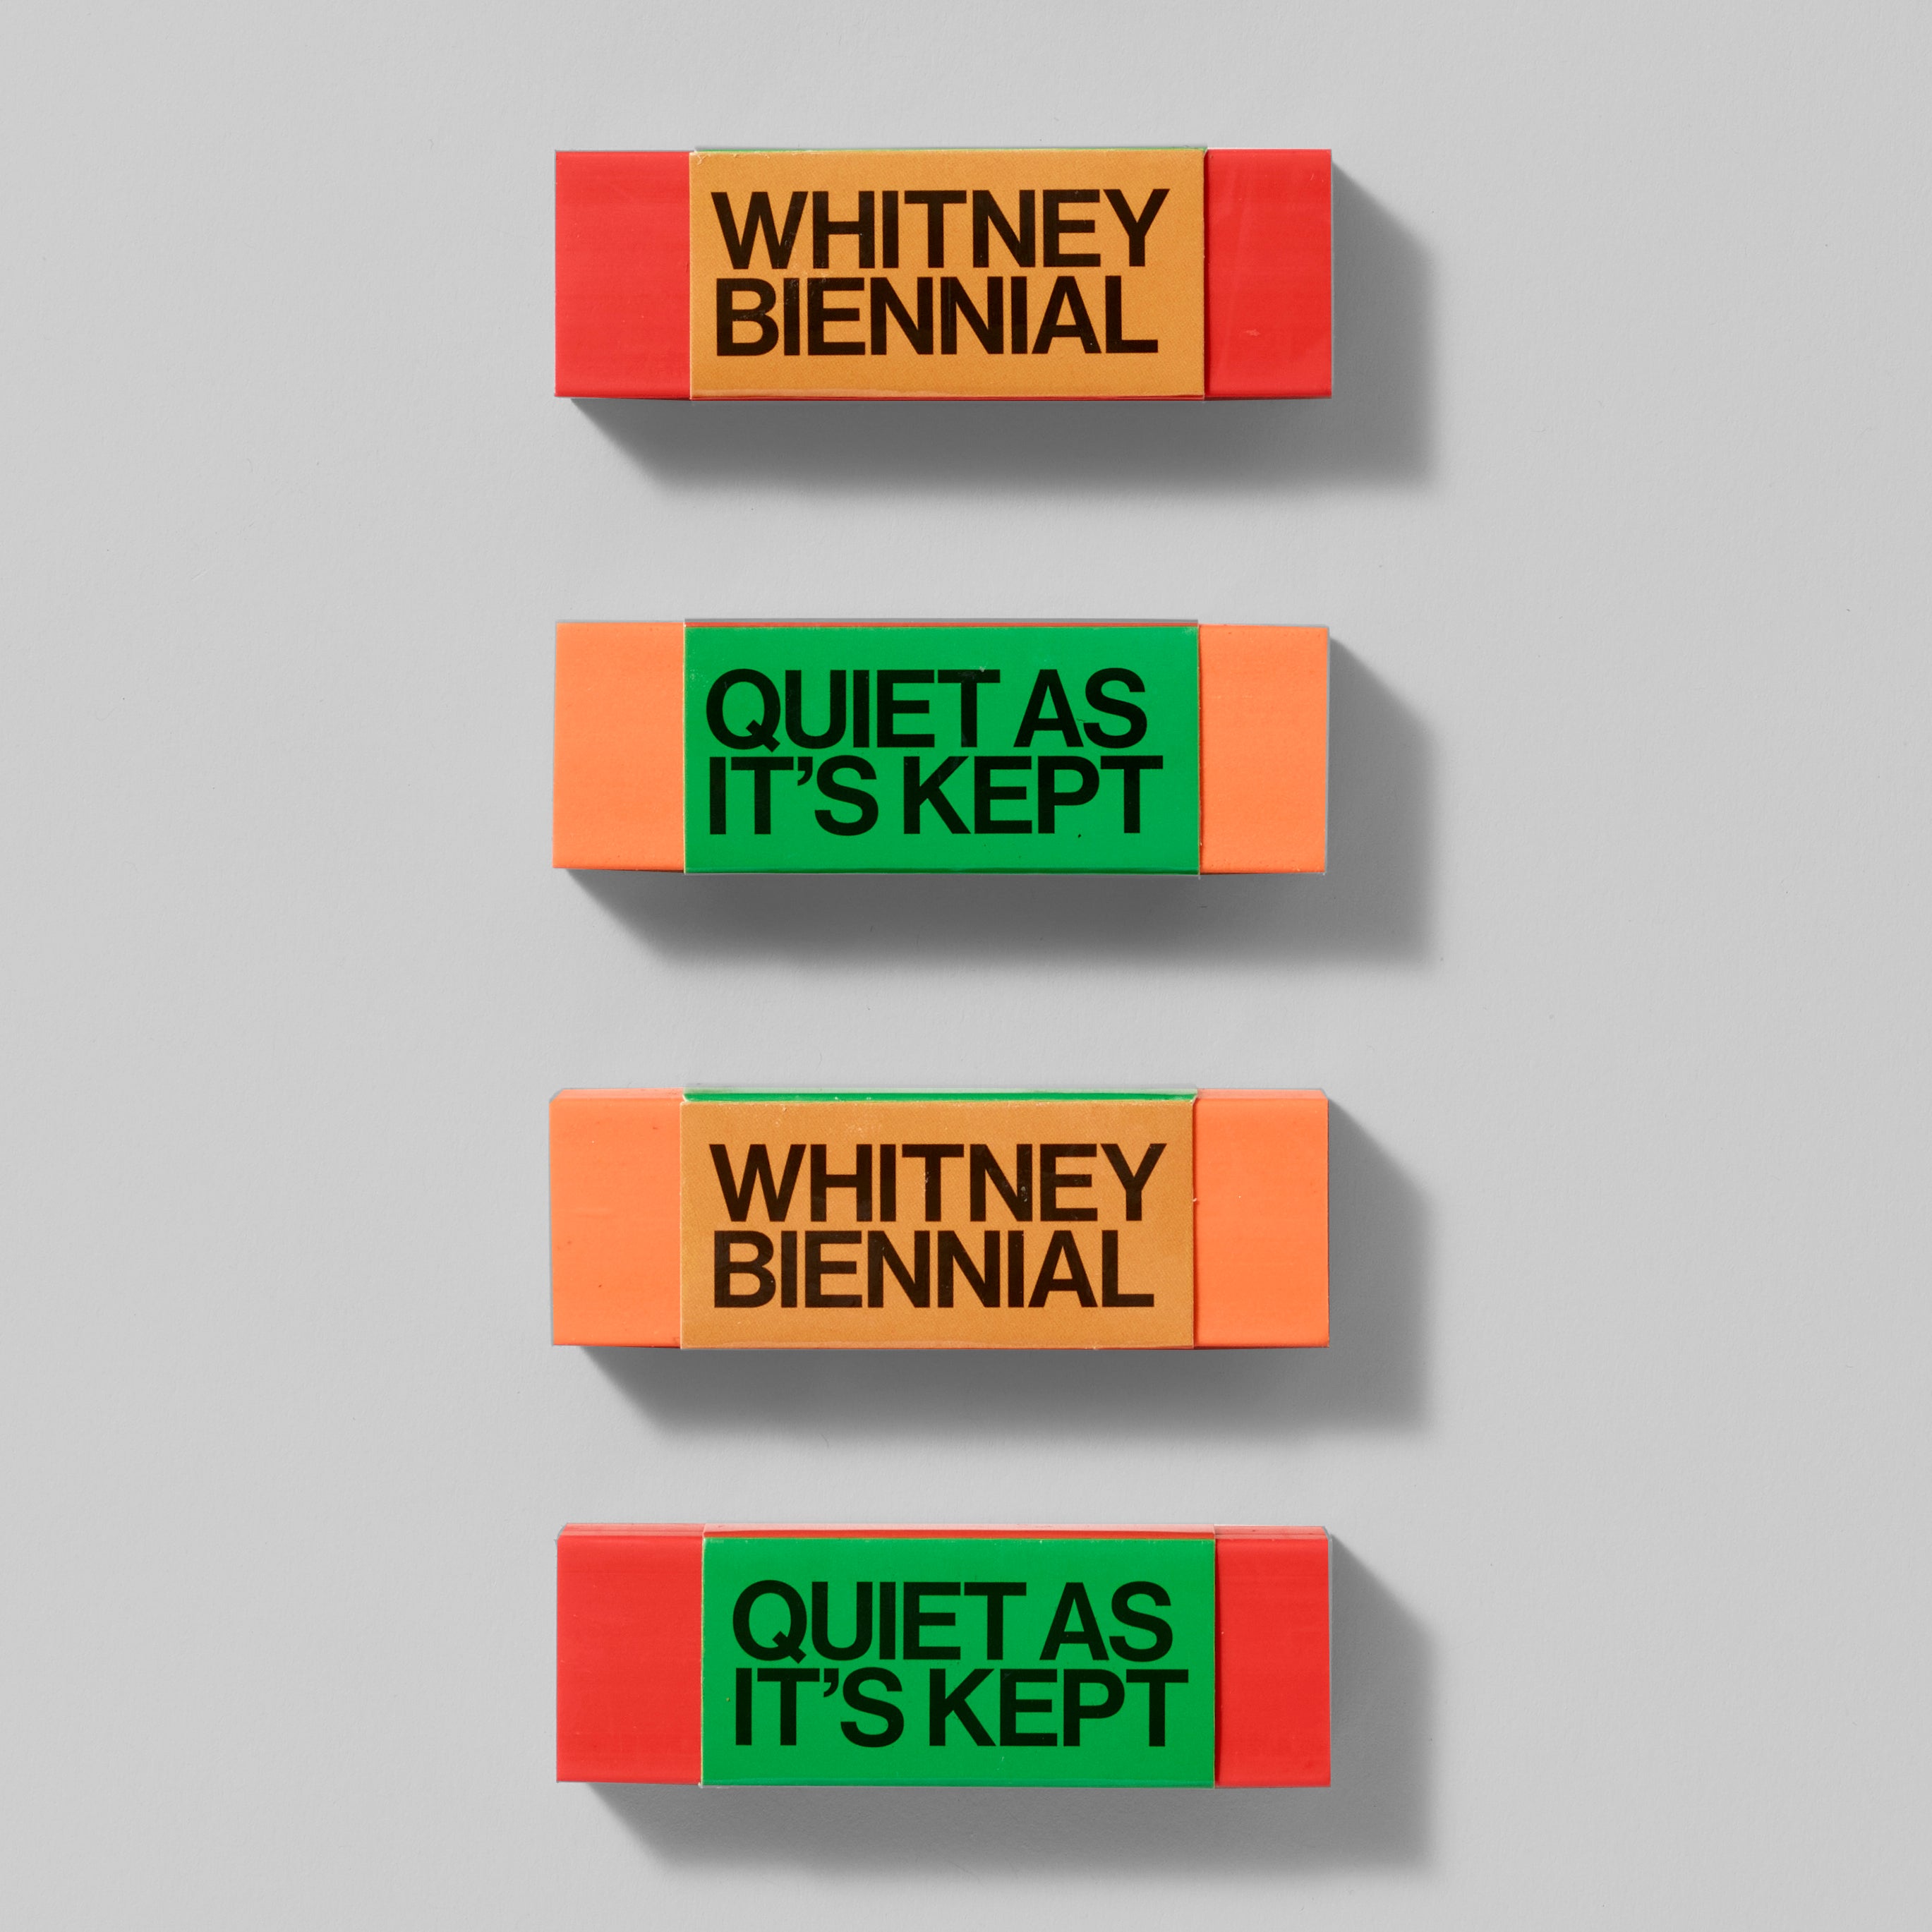 2.75" x 1" red and orange erasers from the Whitney Biennial